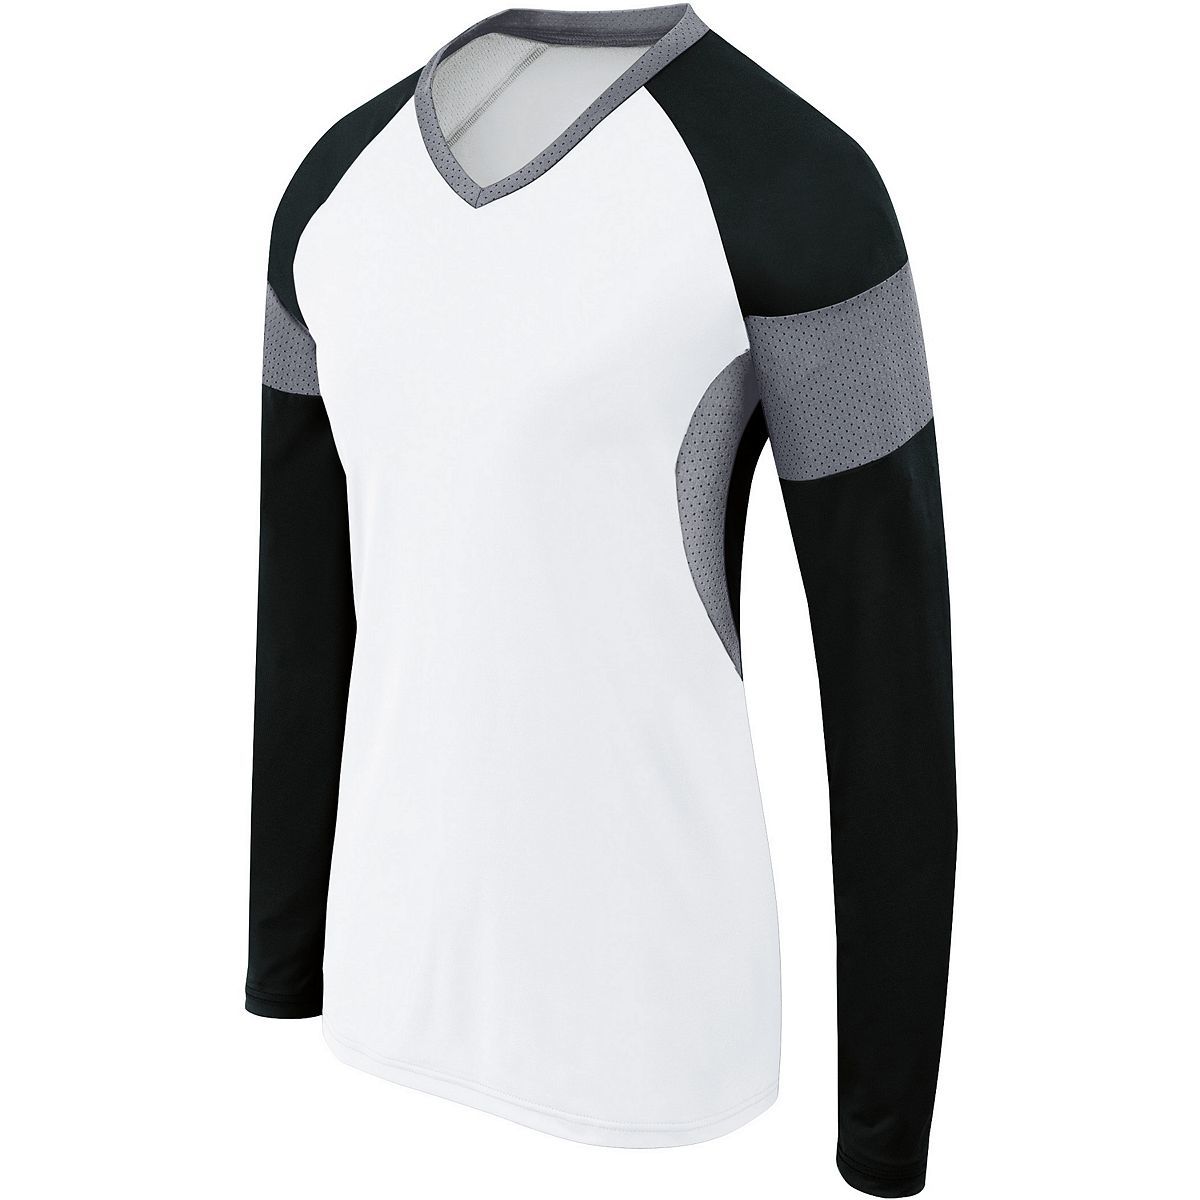 High 5 Girls Long Sleeve Raptor Jersey in White/Black/Graphite  -Part of the Girls, High5-Products, Volleyball, Girls-Jersey, Shirts product lines at KanaleyCreations.com